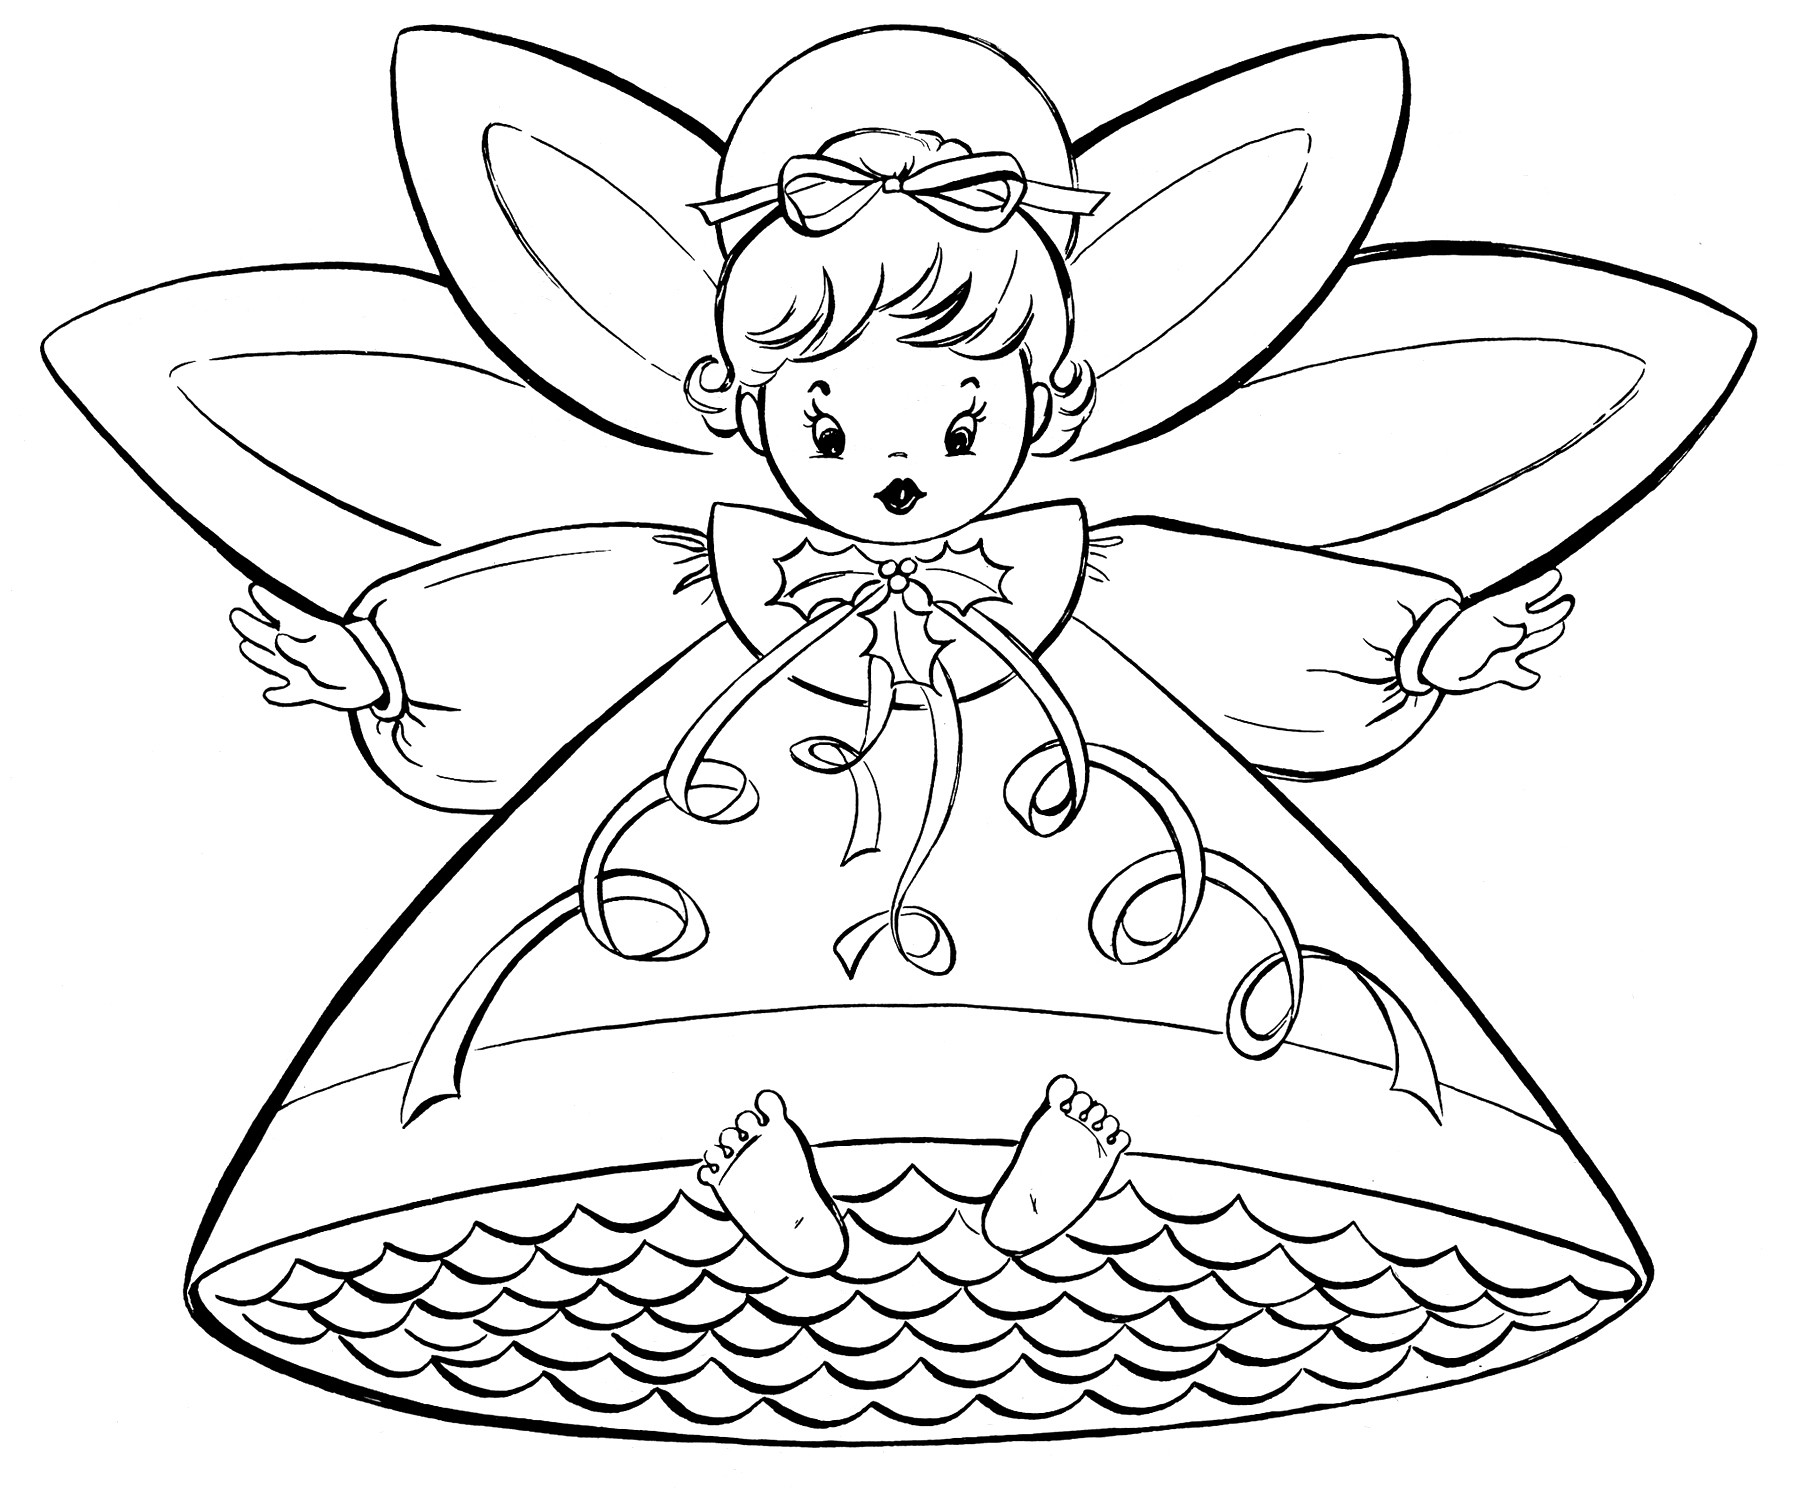 Free Printable Christmas Coloring Pages
 Free Christmas Coloring Pages Retro Angels The